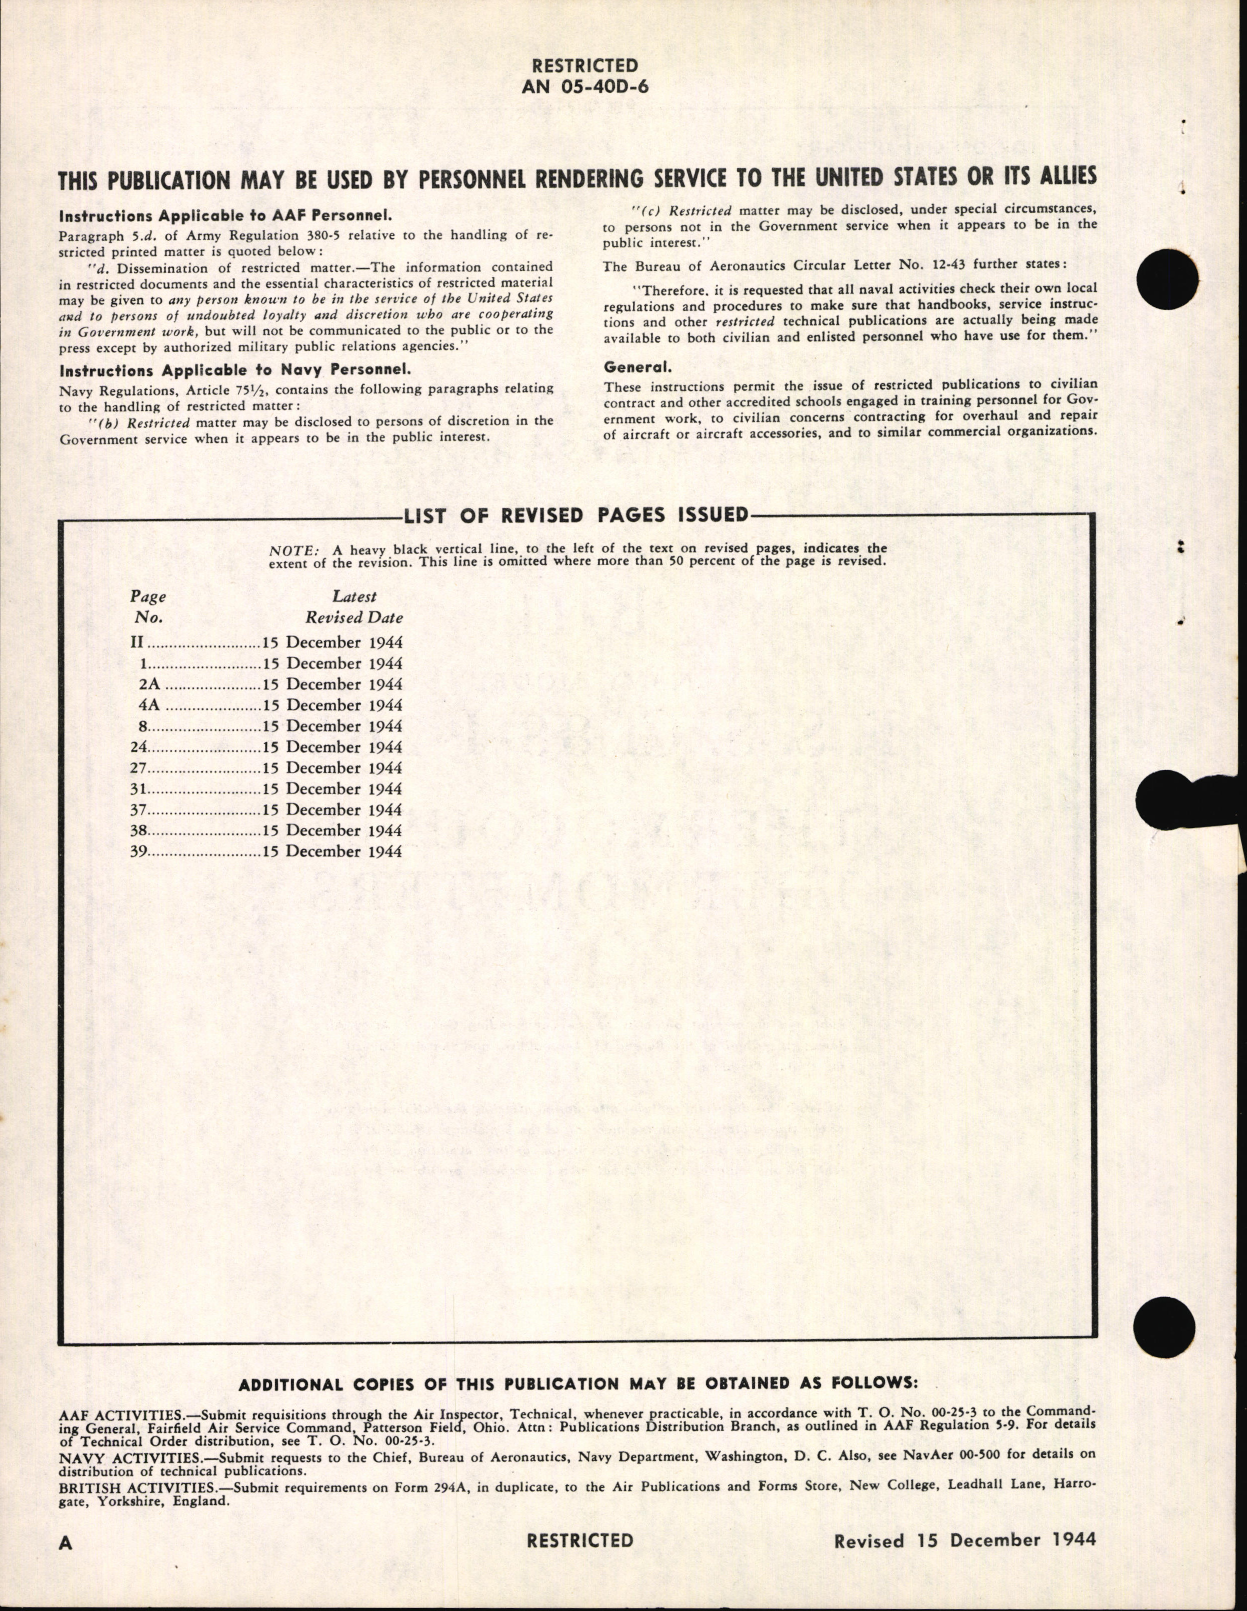 Sample page 4 from AirCorps Library document: Handbook of Instructions with Parts Catalog for Type B-11 and F.S.S.C. 88-I-2660 Thermocouple Thermometers